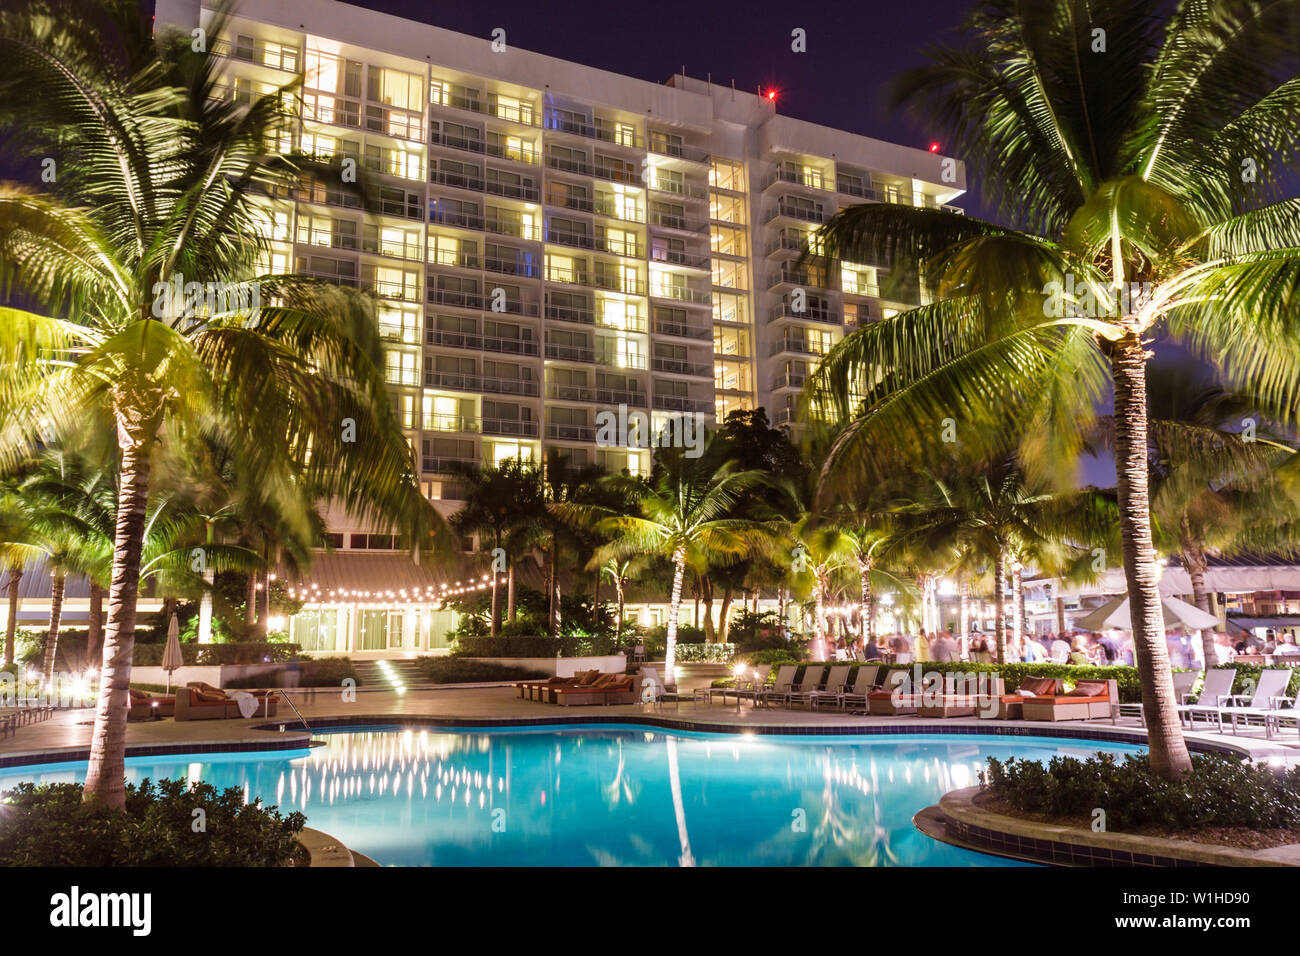 Fort Ft. Lauderdale Florida,Hilton Fort Lauderdale Marina,hotel,hotels,chain,hospitality,lodging,pool,tropical,lighted palm tree,evening,bar lounge pu Stock Photo